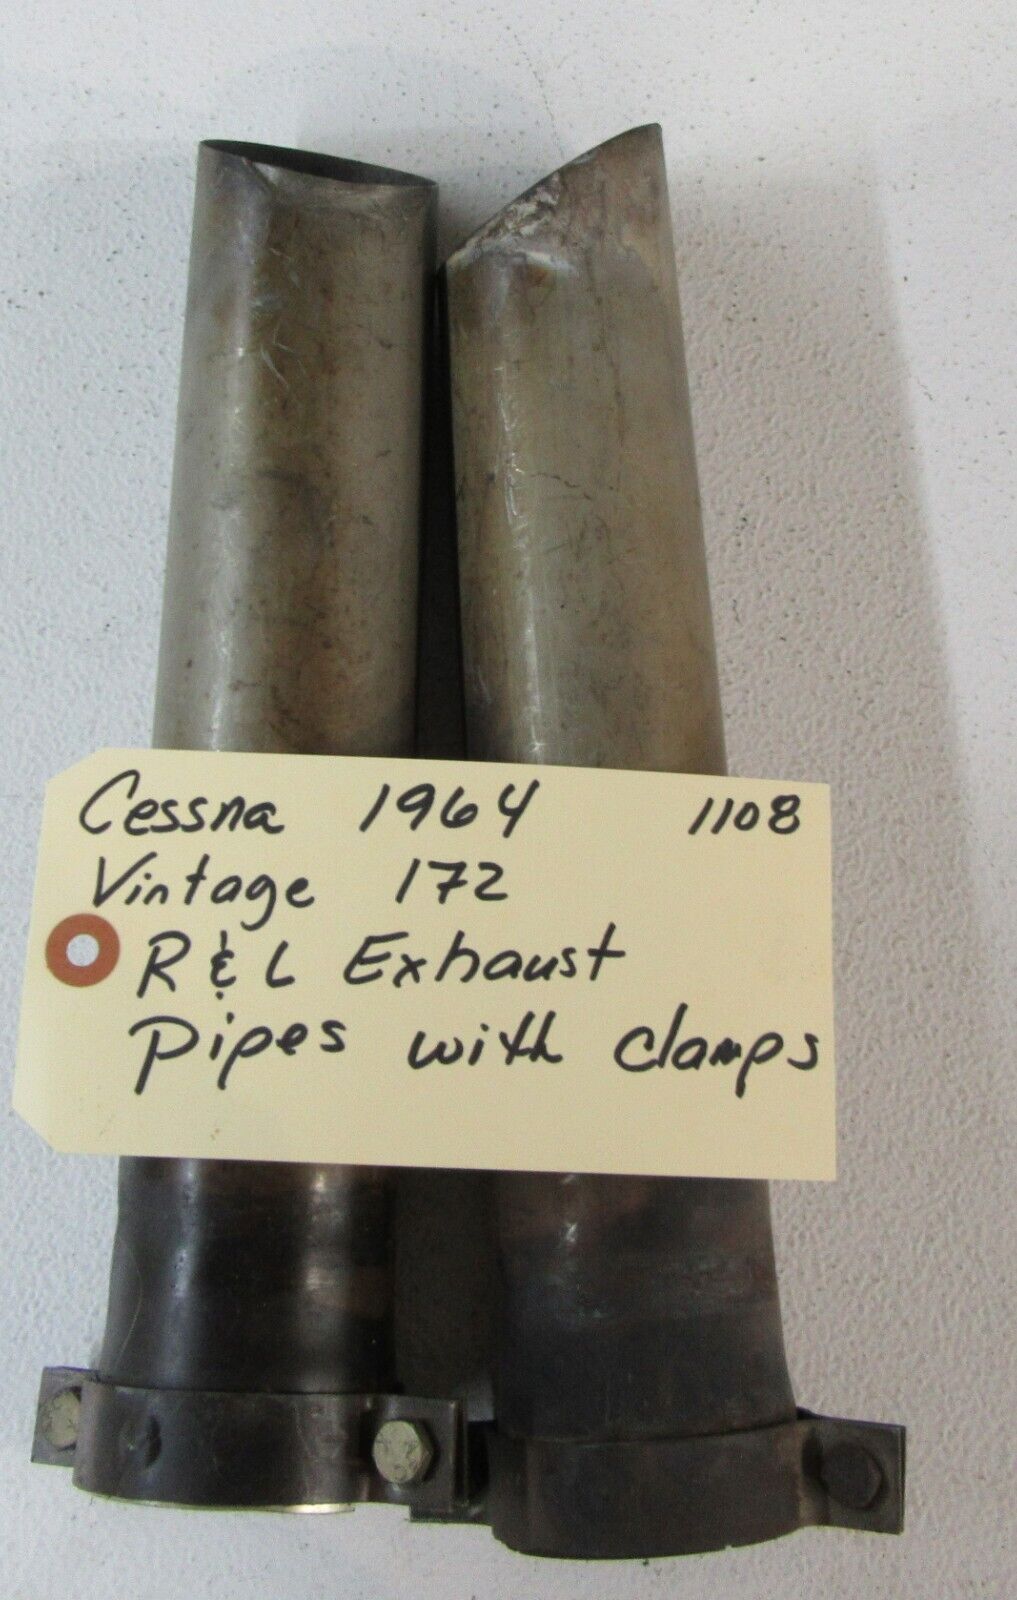 Cessna 1964 Vintage 172 R&L Exhaust Pipes with clamps